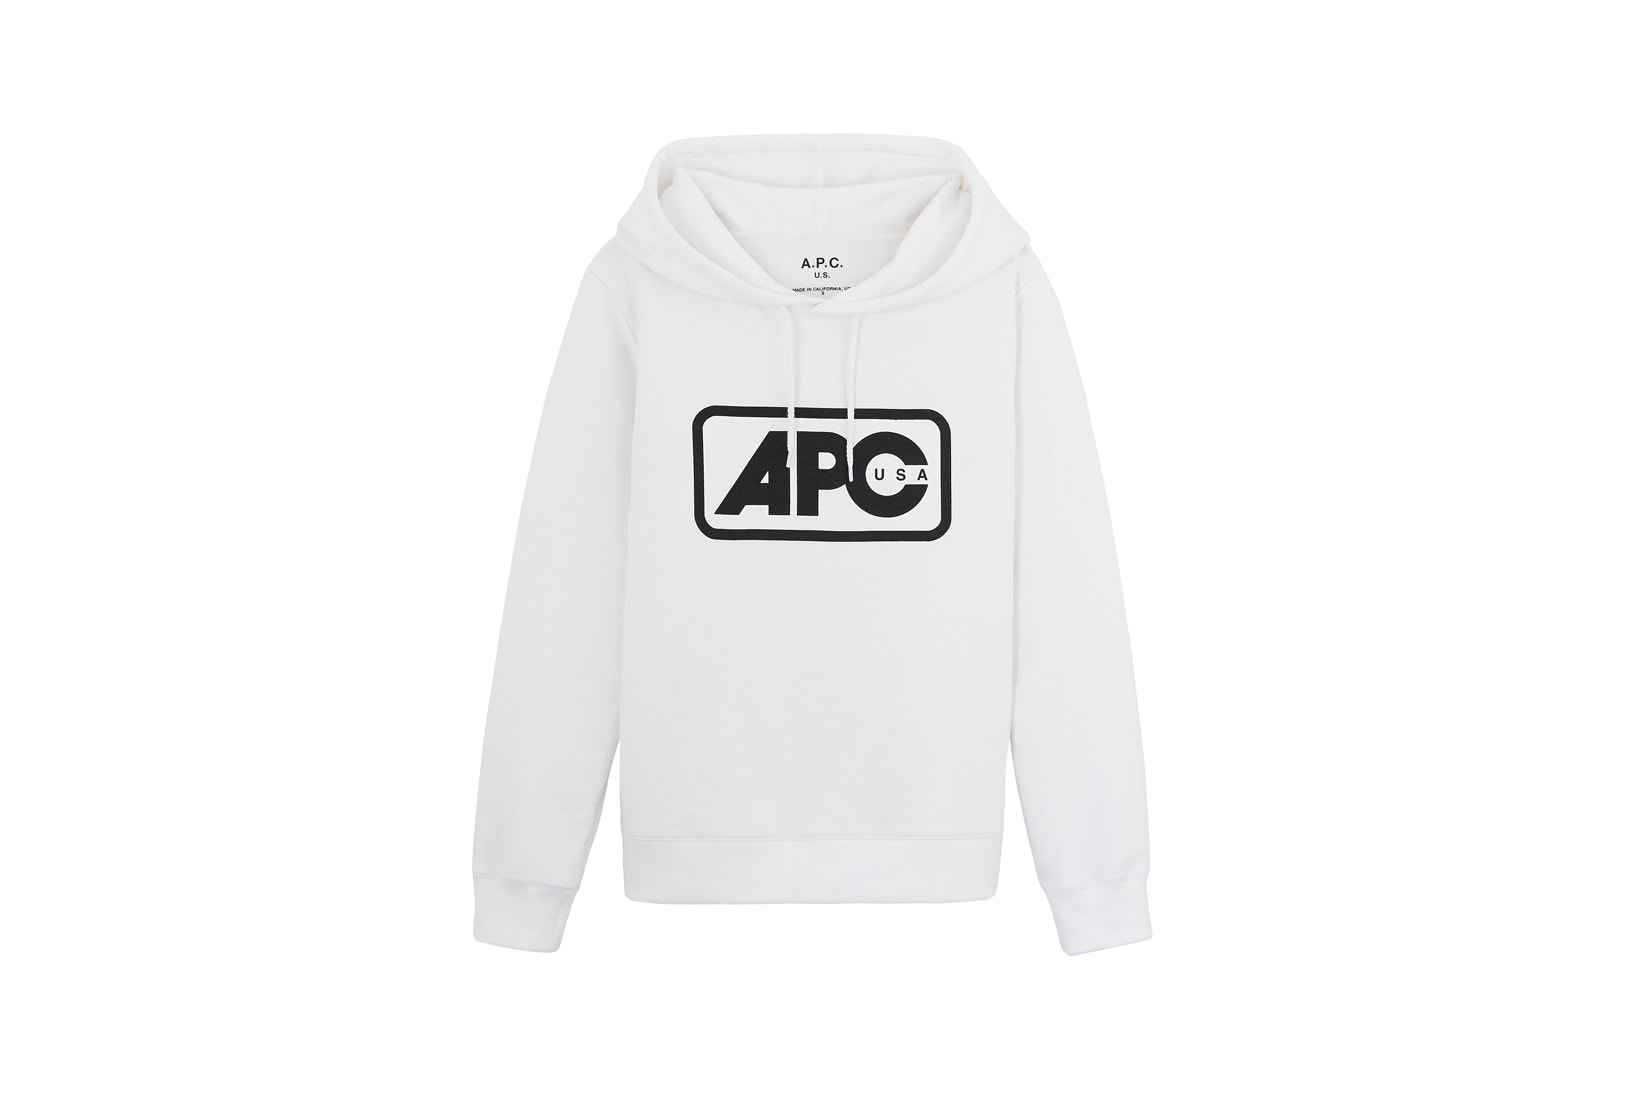 A.P.C. Fall/Winter 2018 Collection Lettrism Hoodie White